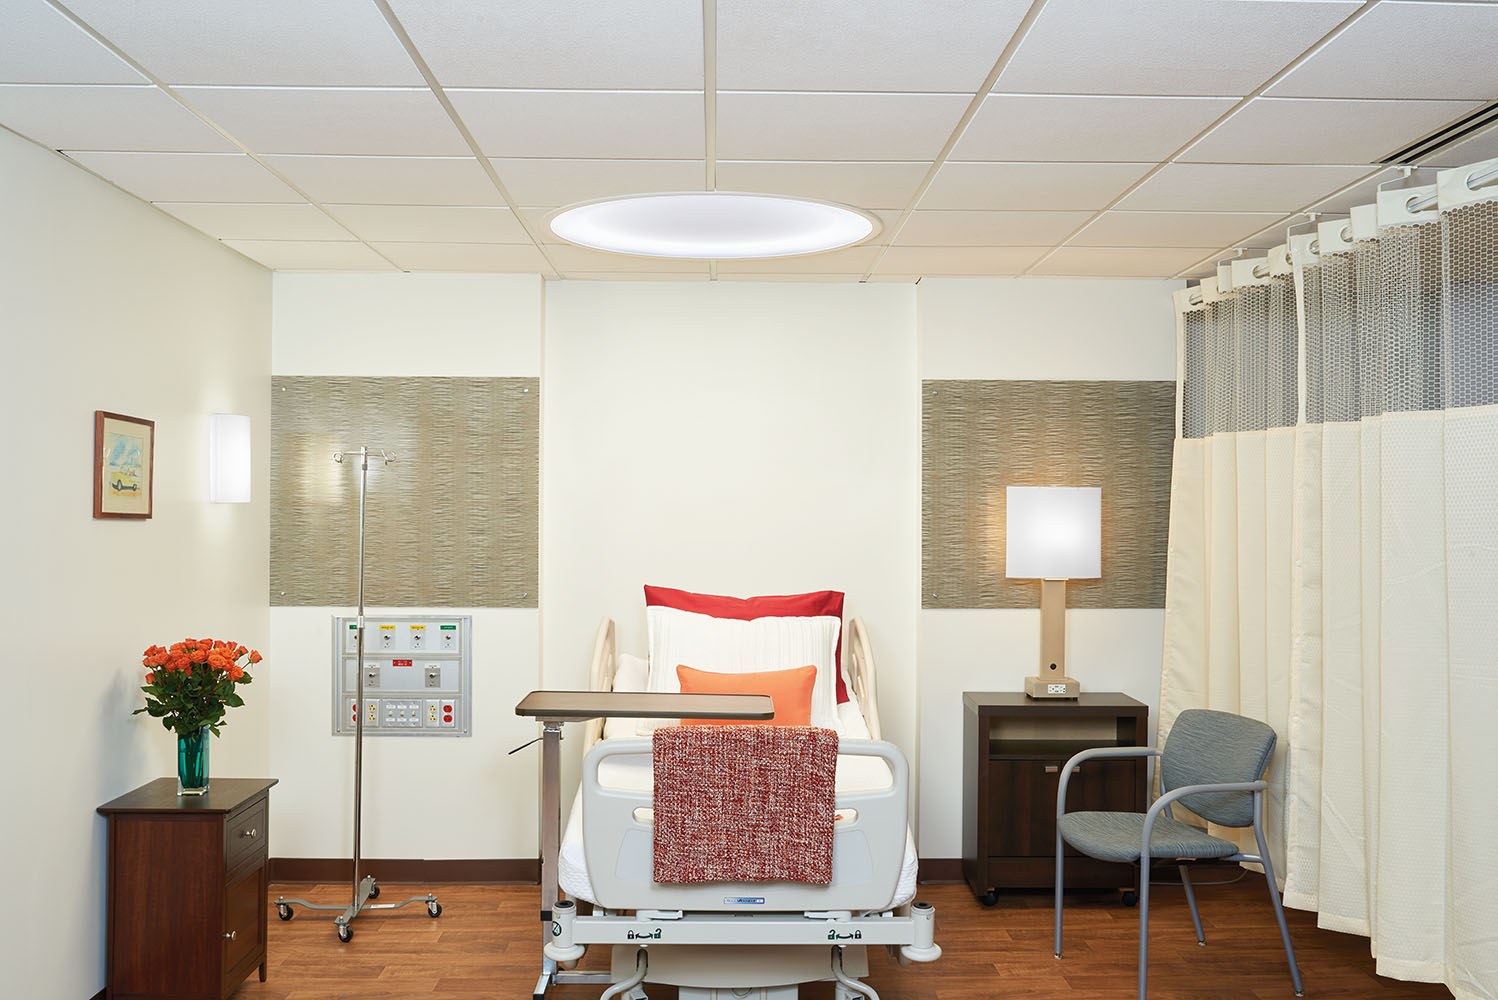 Symmetry overbed and Serenity table lamp fixtures provide comforting patient room lighting.